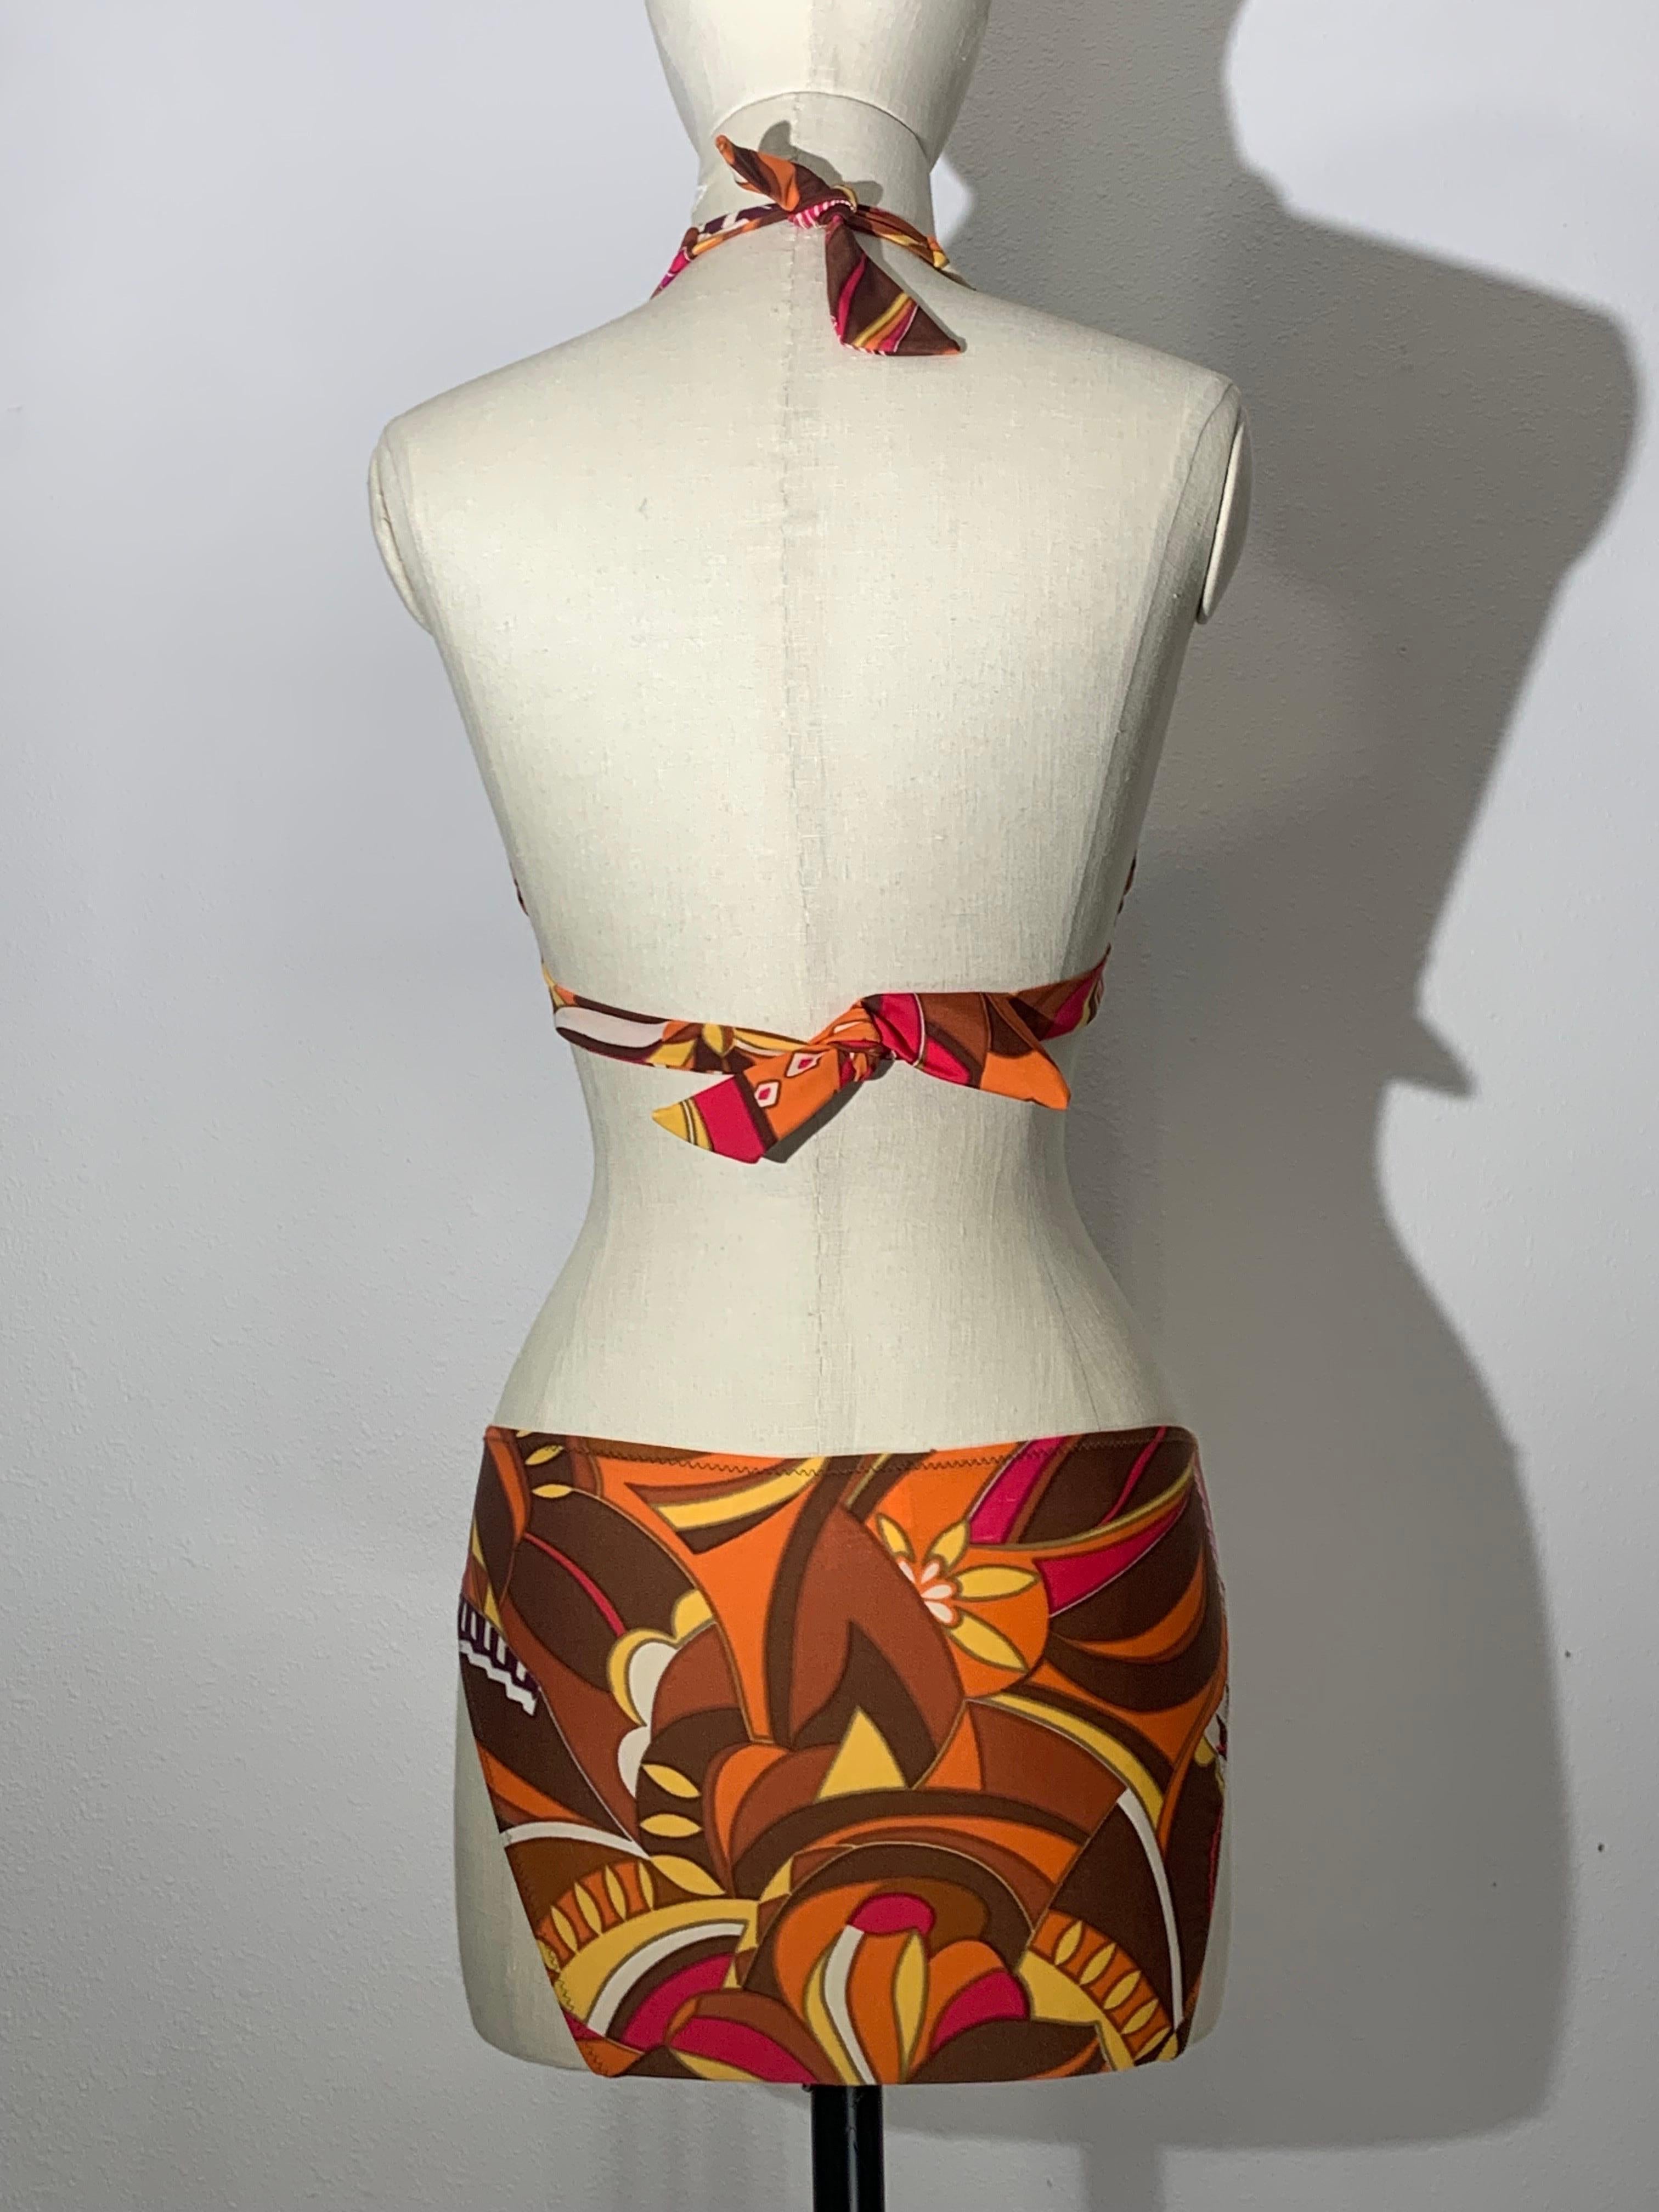 1970s Gottex Stylized Floral 2-Piece Bikini Swimsuit in Brown Copper and Orange For Sale 5